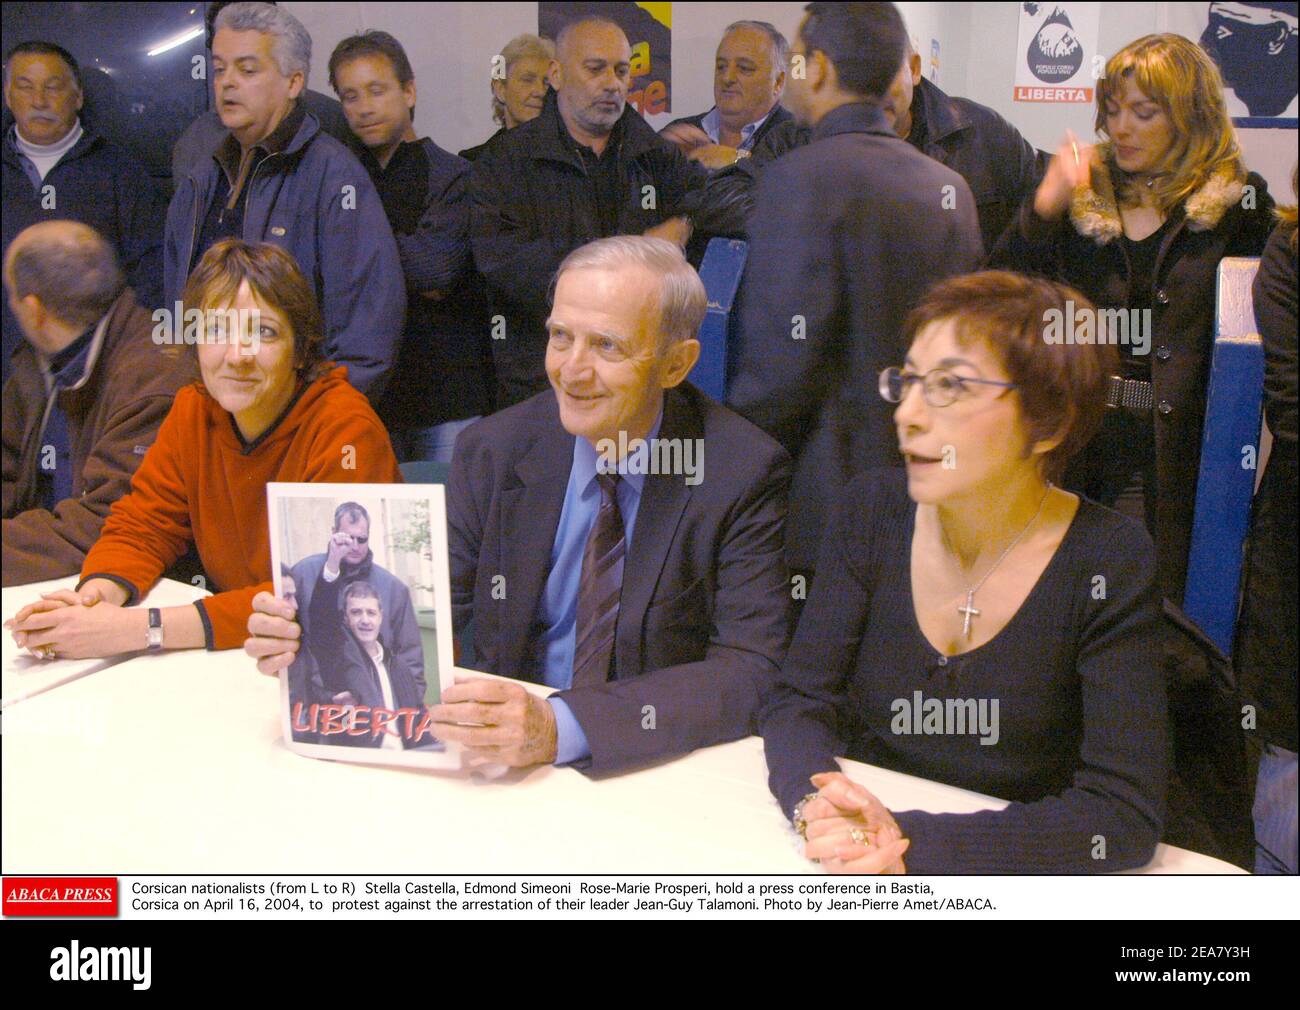 Corsican nationalists (from L to R) Stella Castella, Edmond Simeoni Rose-Marie Prosperi, hold a press conference in Bastia, Corsica on April 16, 2004, to protest against the arrestation of their leader Jean-Guy Talamoni. Photo by Jean-Pierre Amet/ABACA. Stock Photo